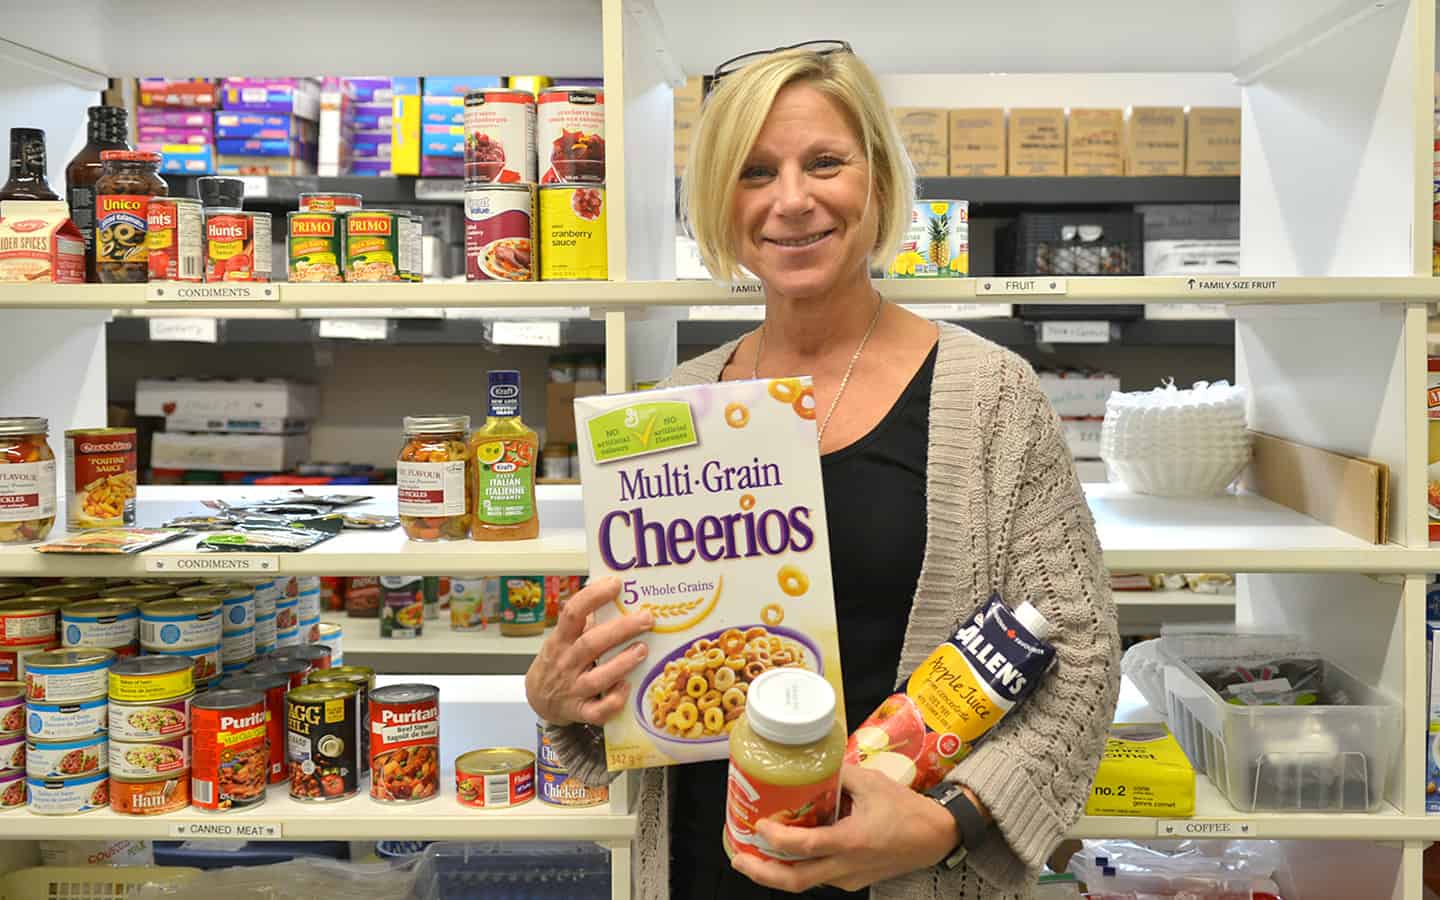 With fall food drive, WCS looks to stock the shelves in preparation for holiday season